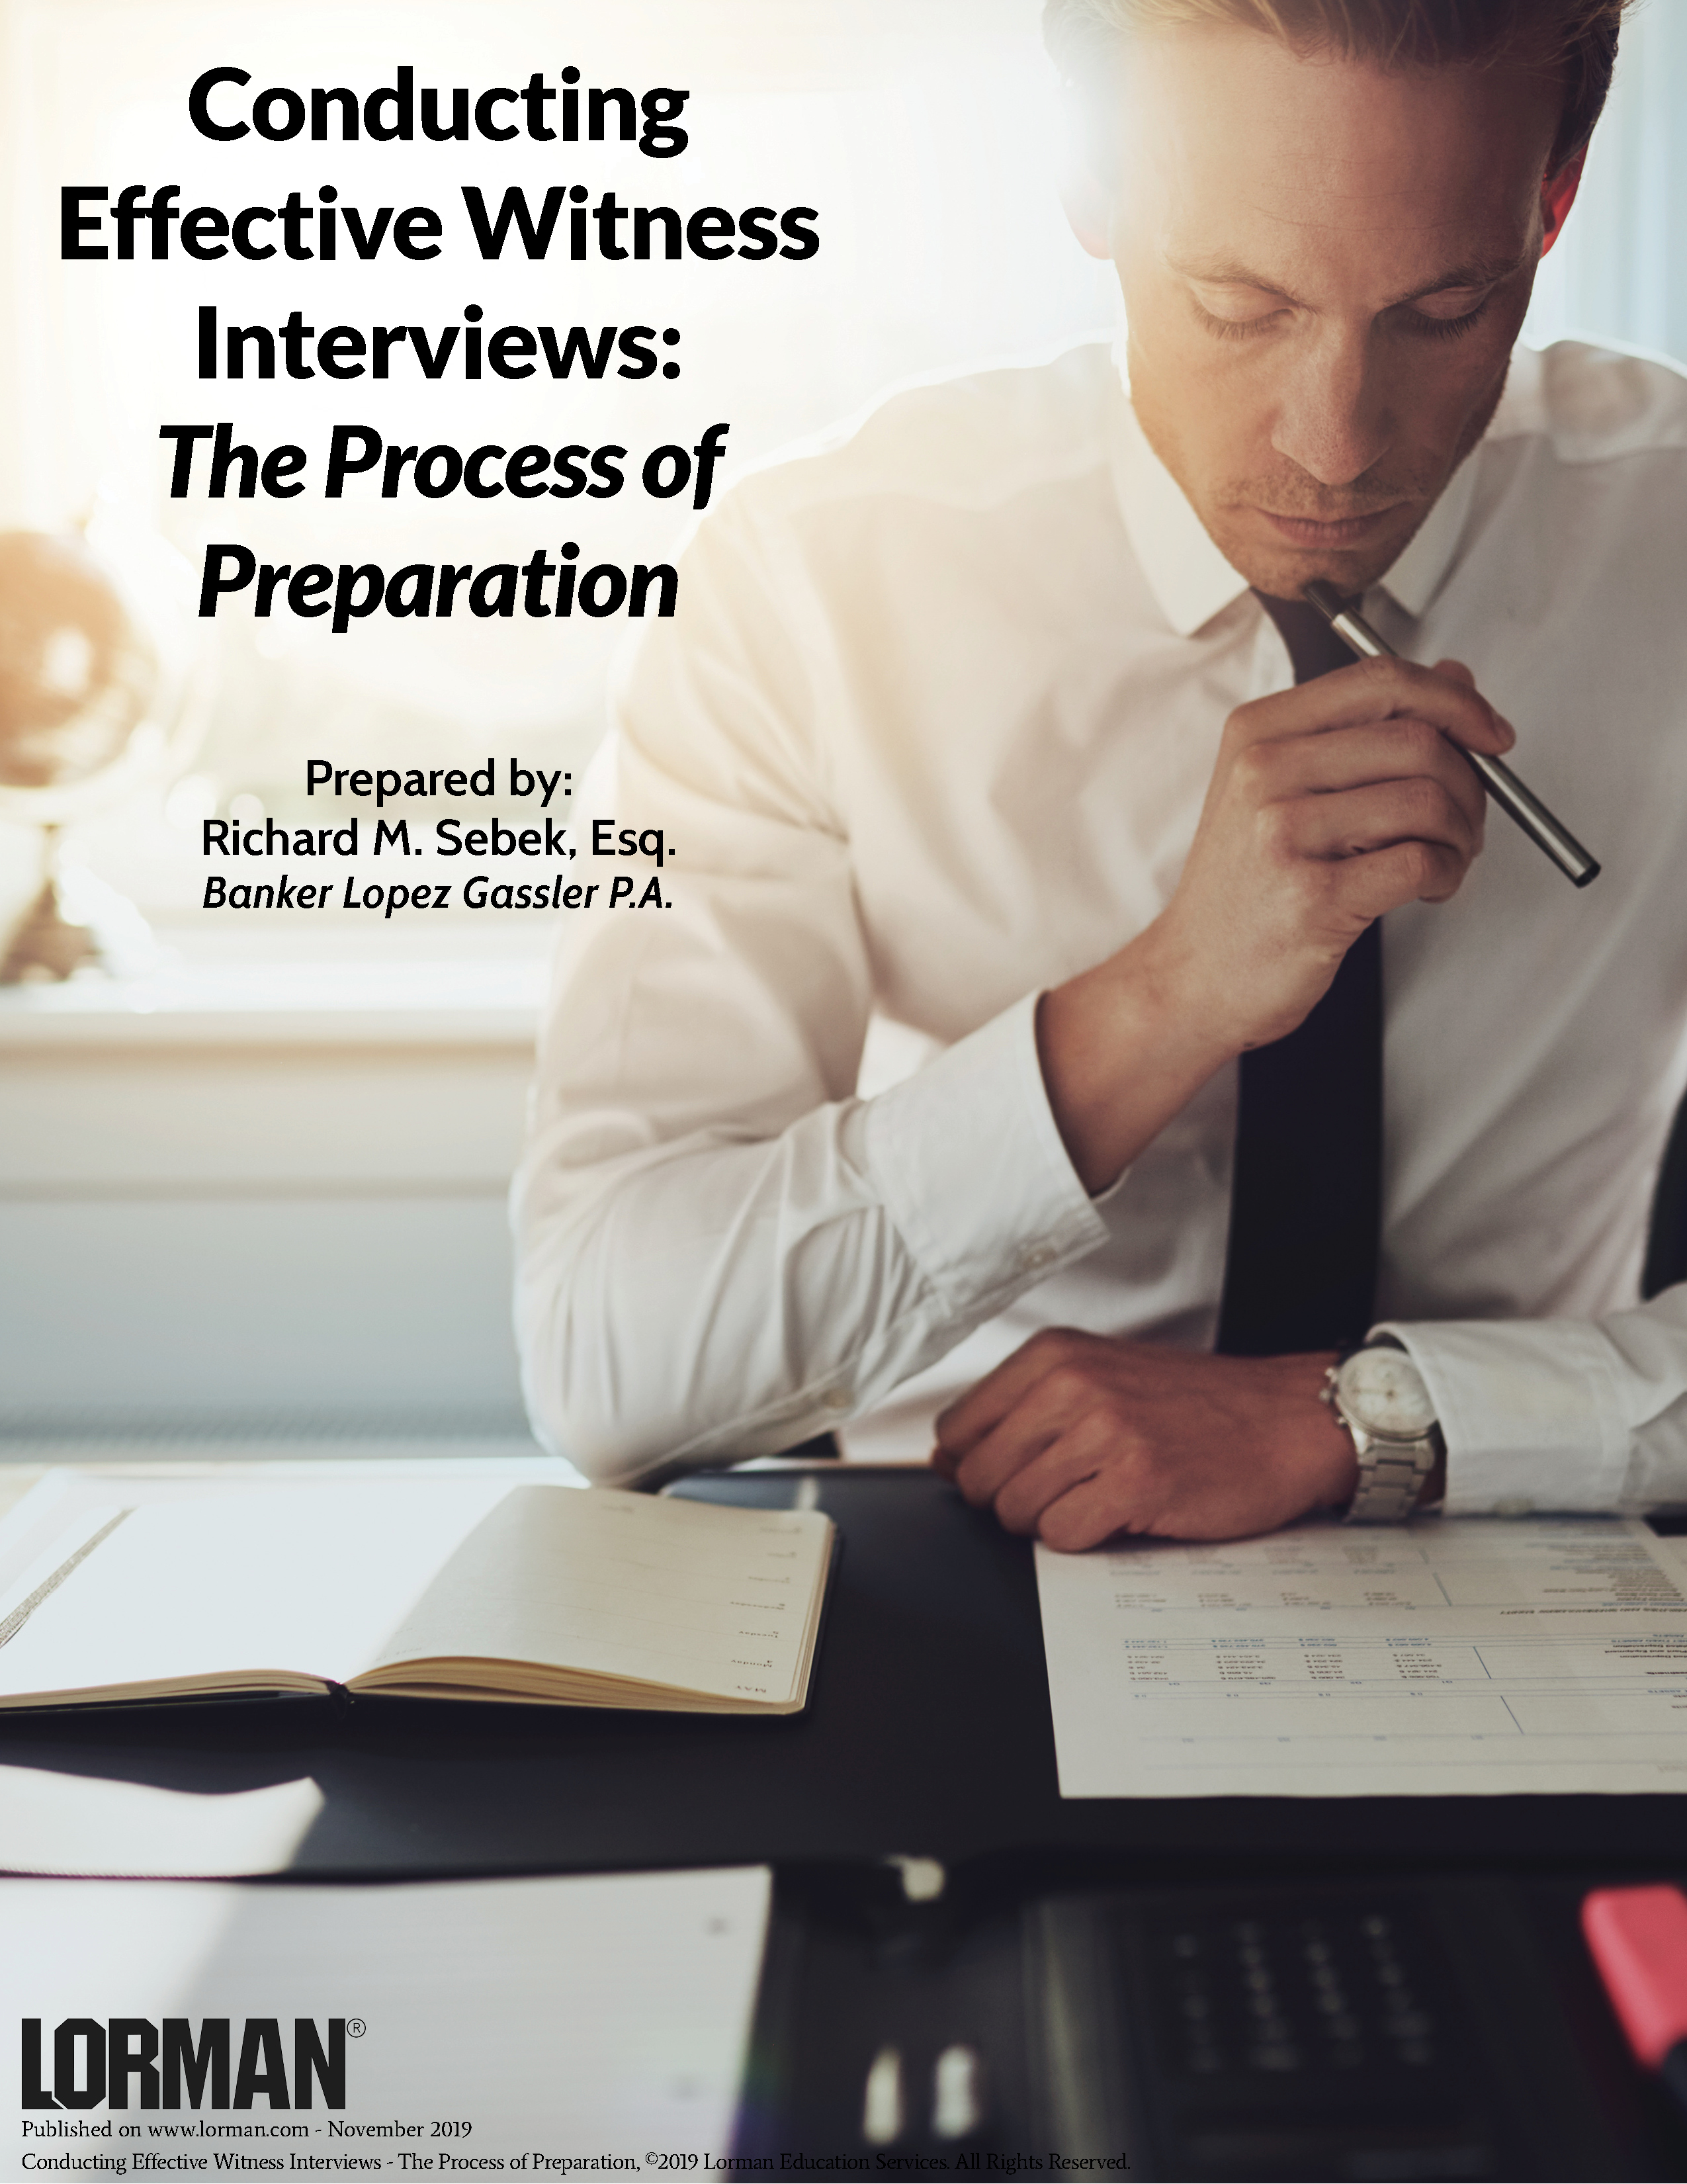 Conducting Effective Witness Interviews - The Process of Preparation